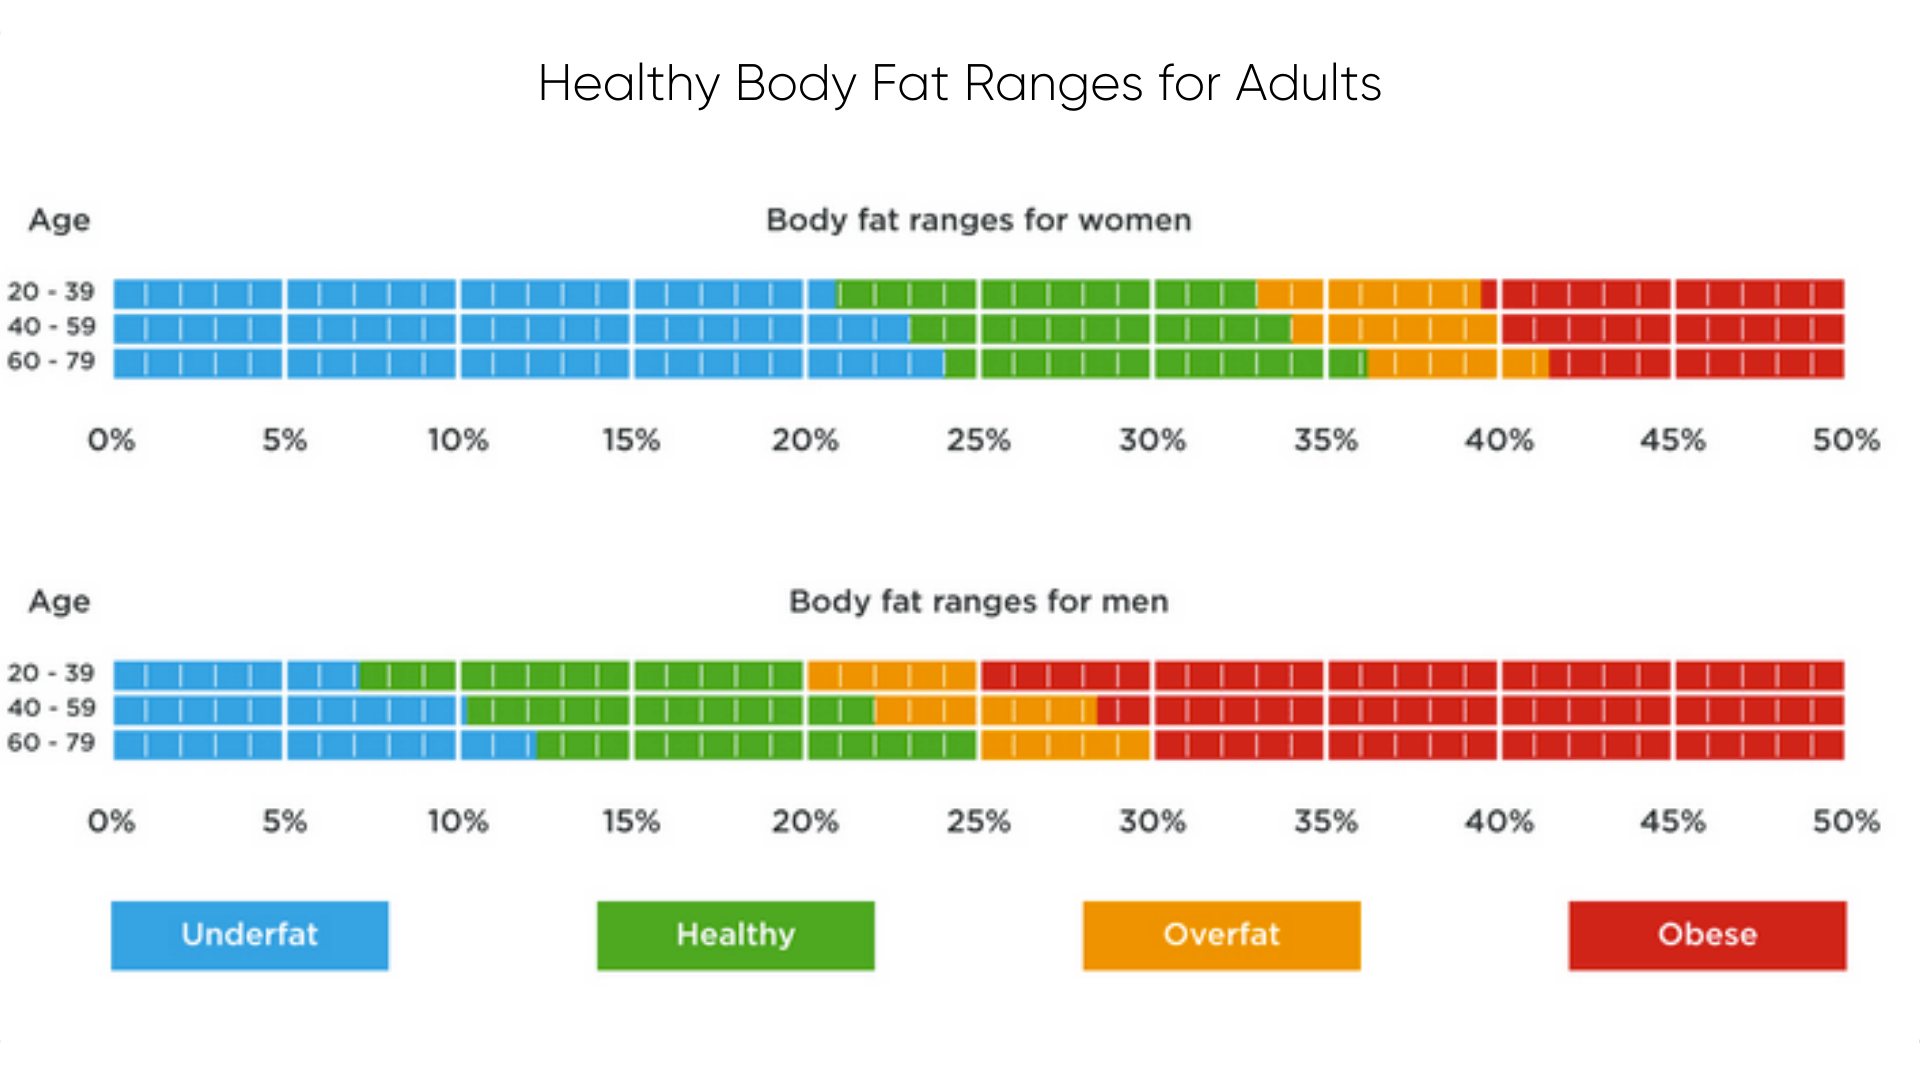 Healthy body fat ranges for adults